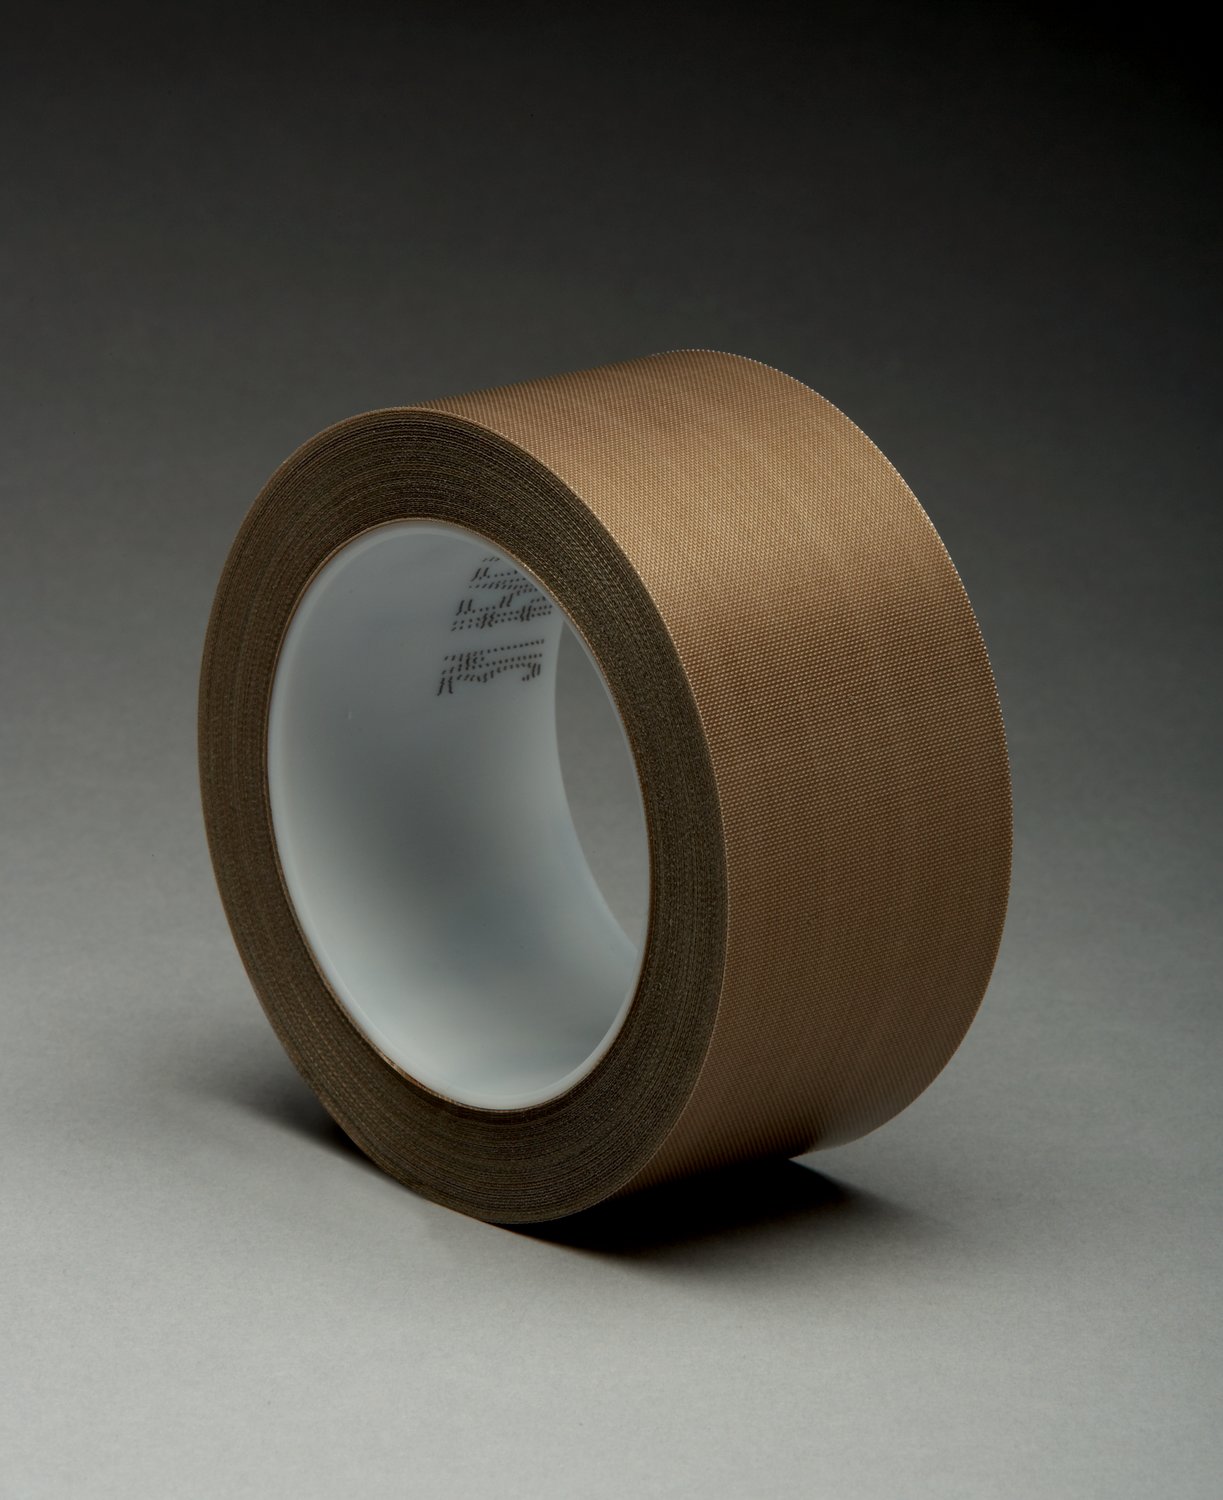 7010380325 - 3M PTFE Glass Cloth Tape 5451, Brown, 1/2 in x 36 yd, 5.6 mil, 18 rolls
per case, Boxed